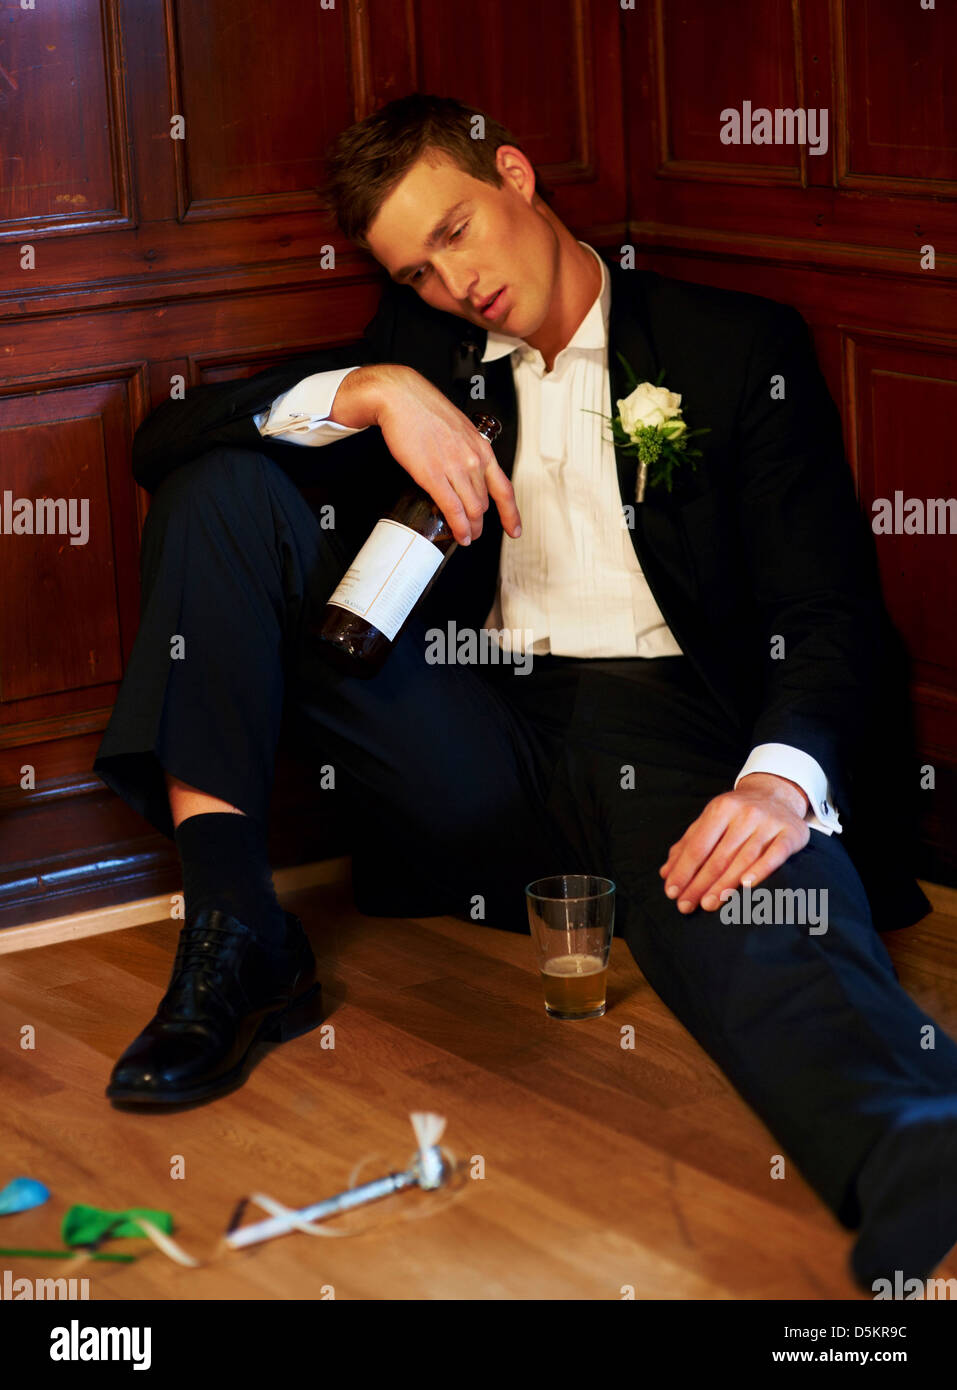 Dinner jacket drunk images stock hi-res - photography and Alamy